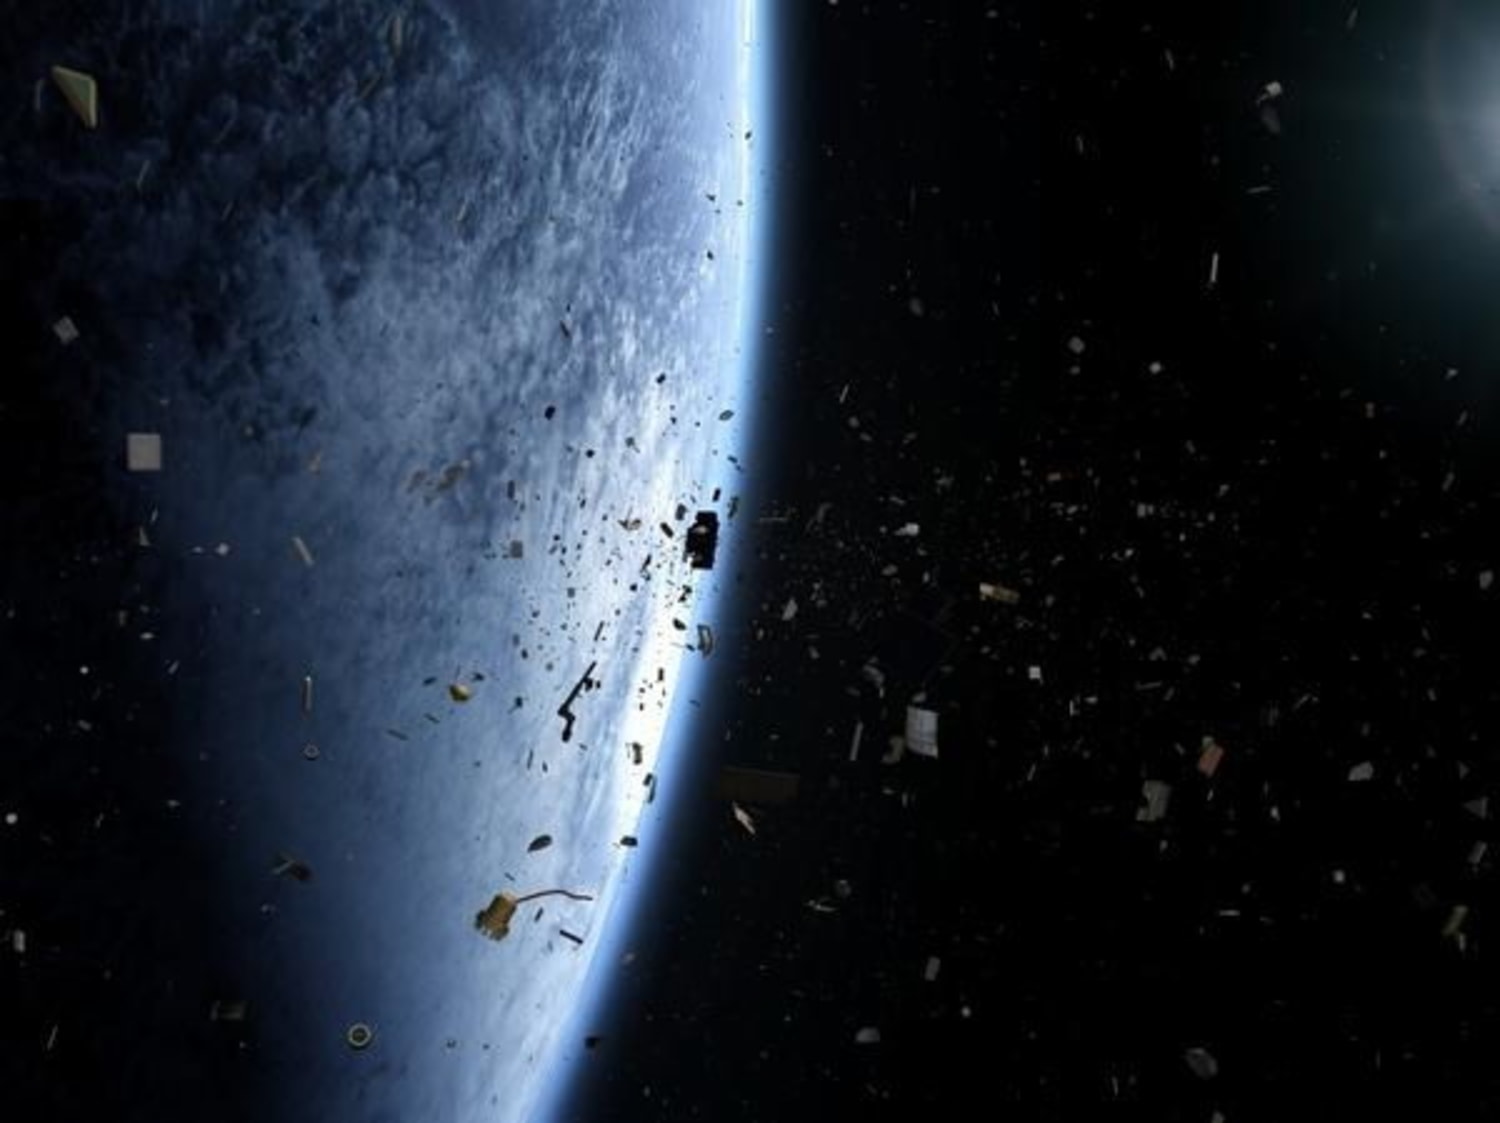 Space junk menace: How to deal with orbital debris